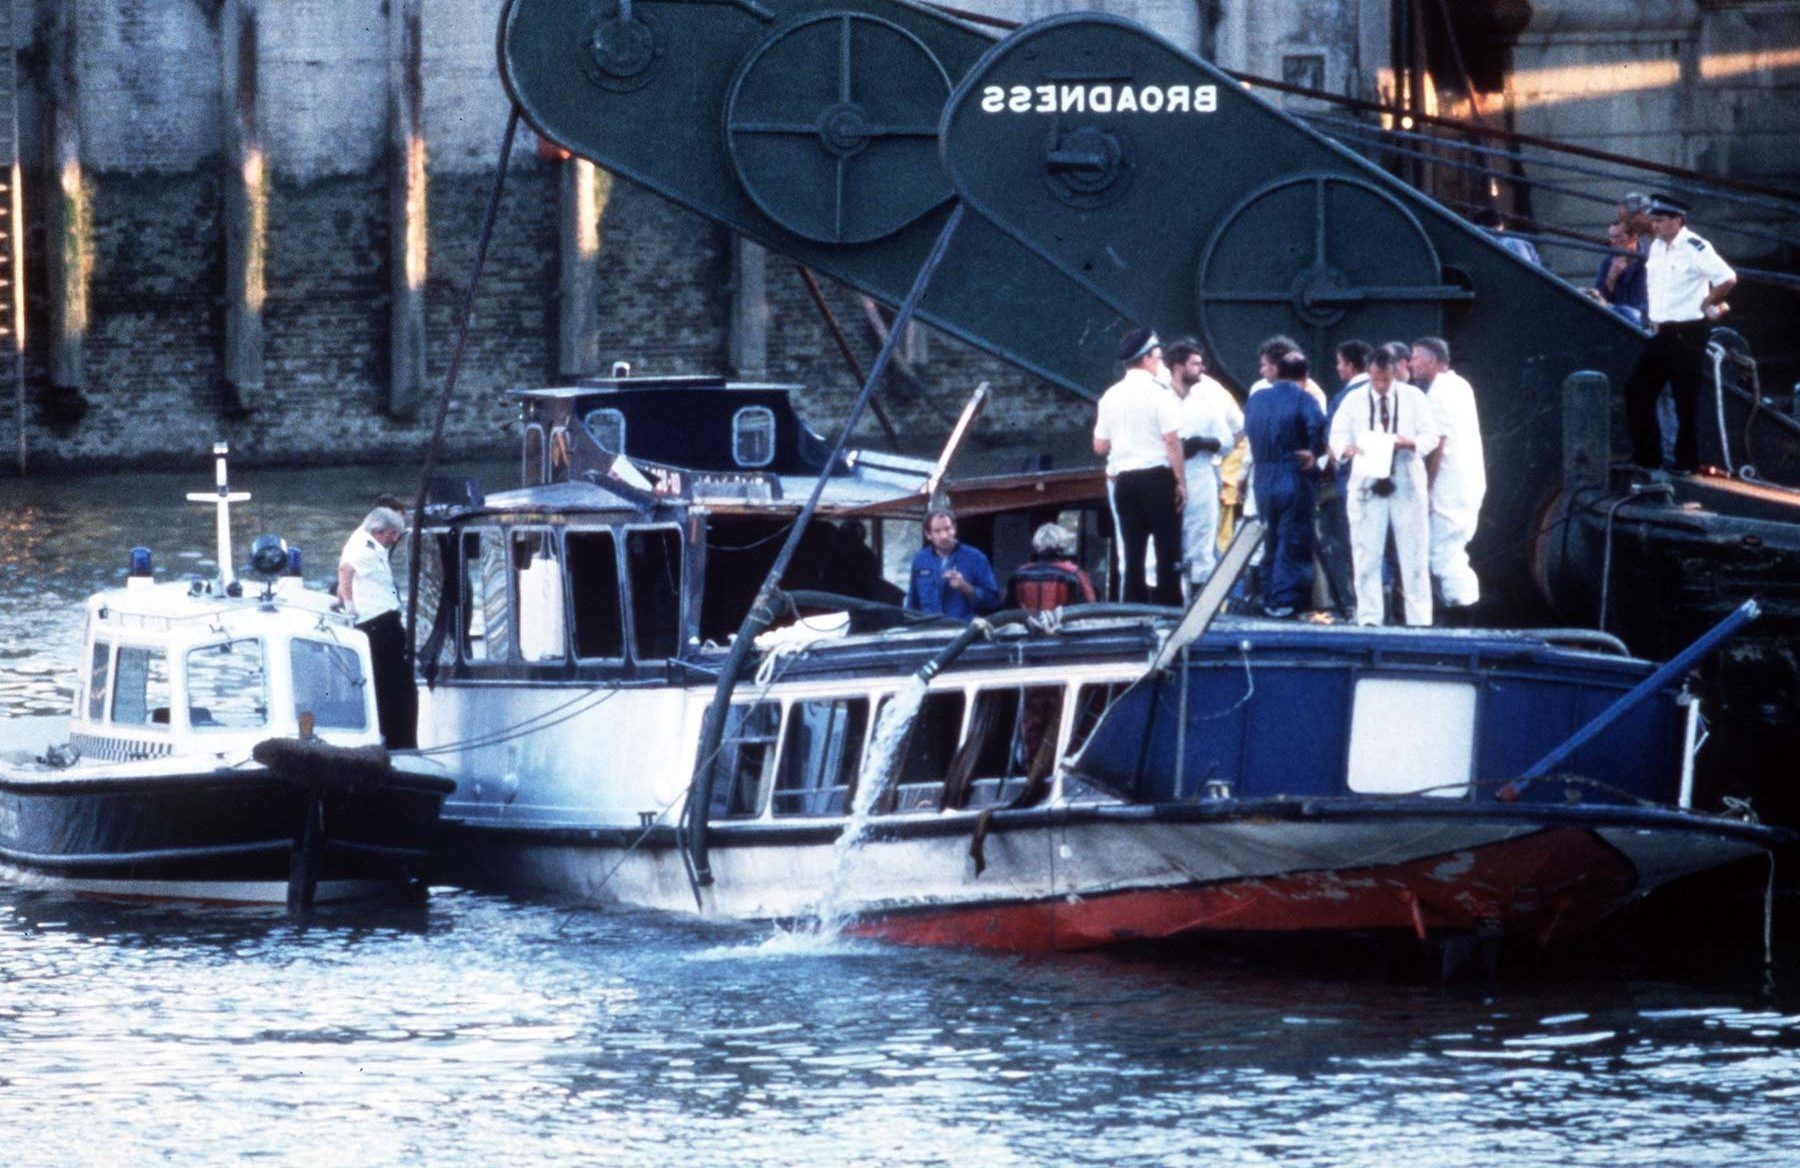 The soap is accused of copying the 1989 Marchioness tragedy in which 51 people died